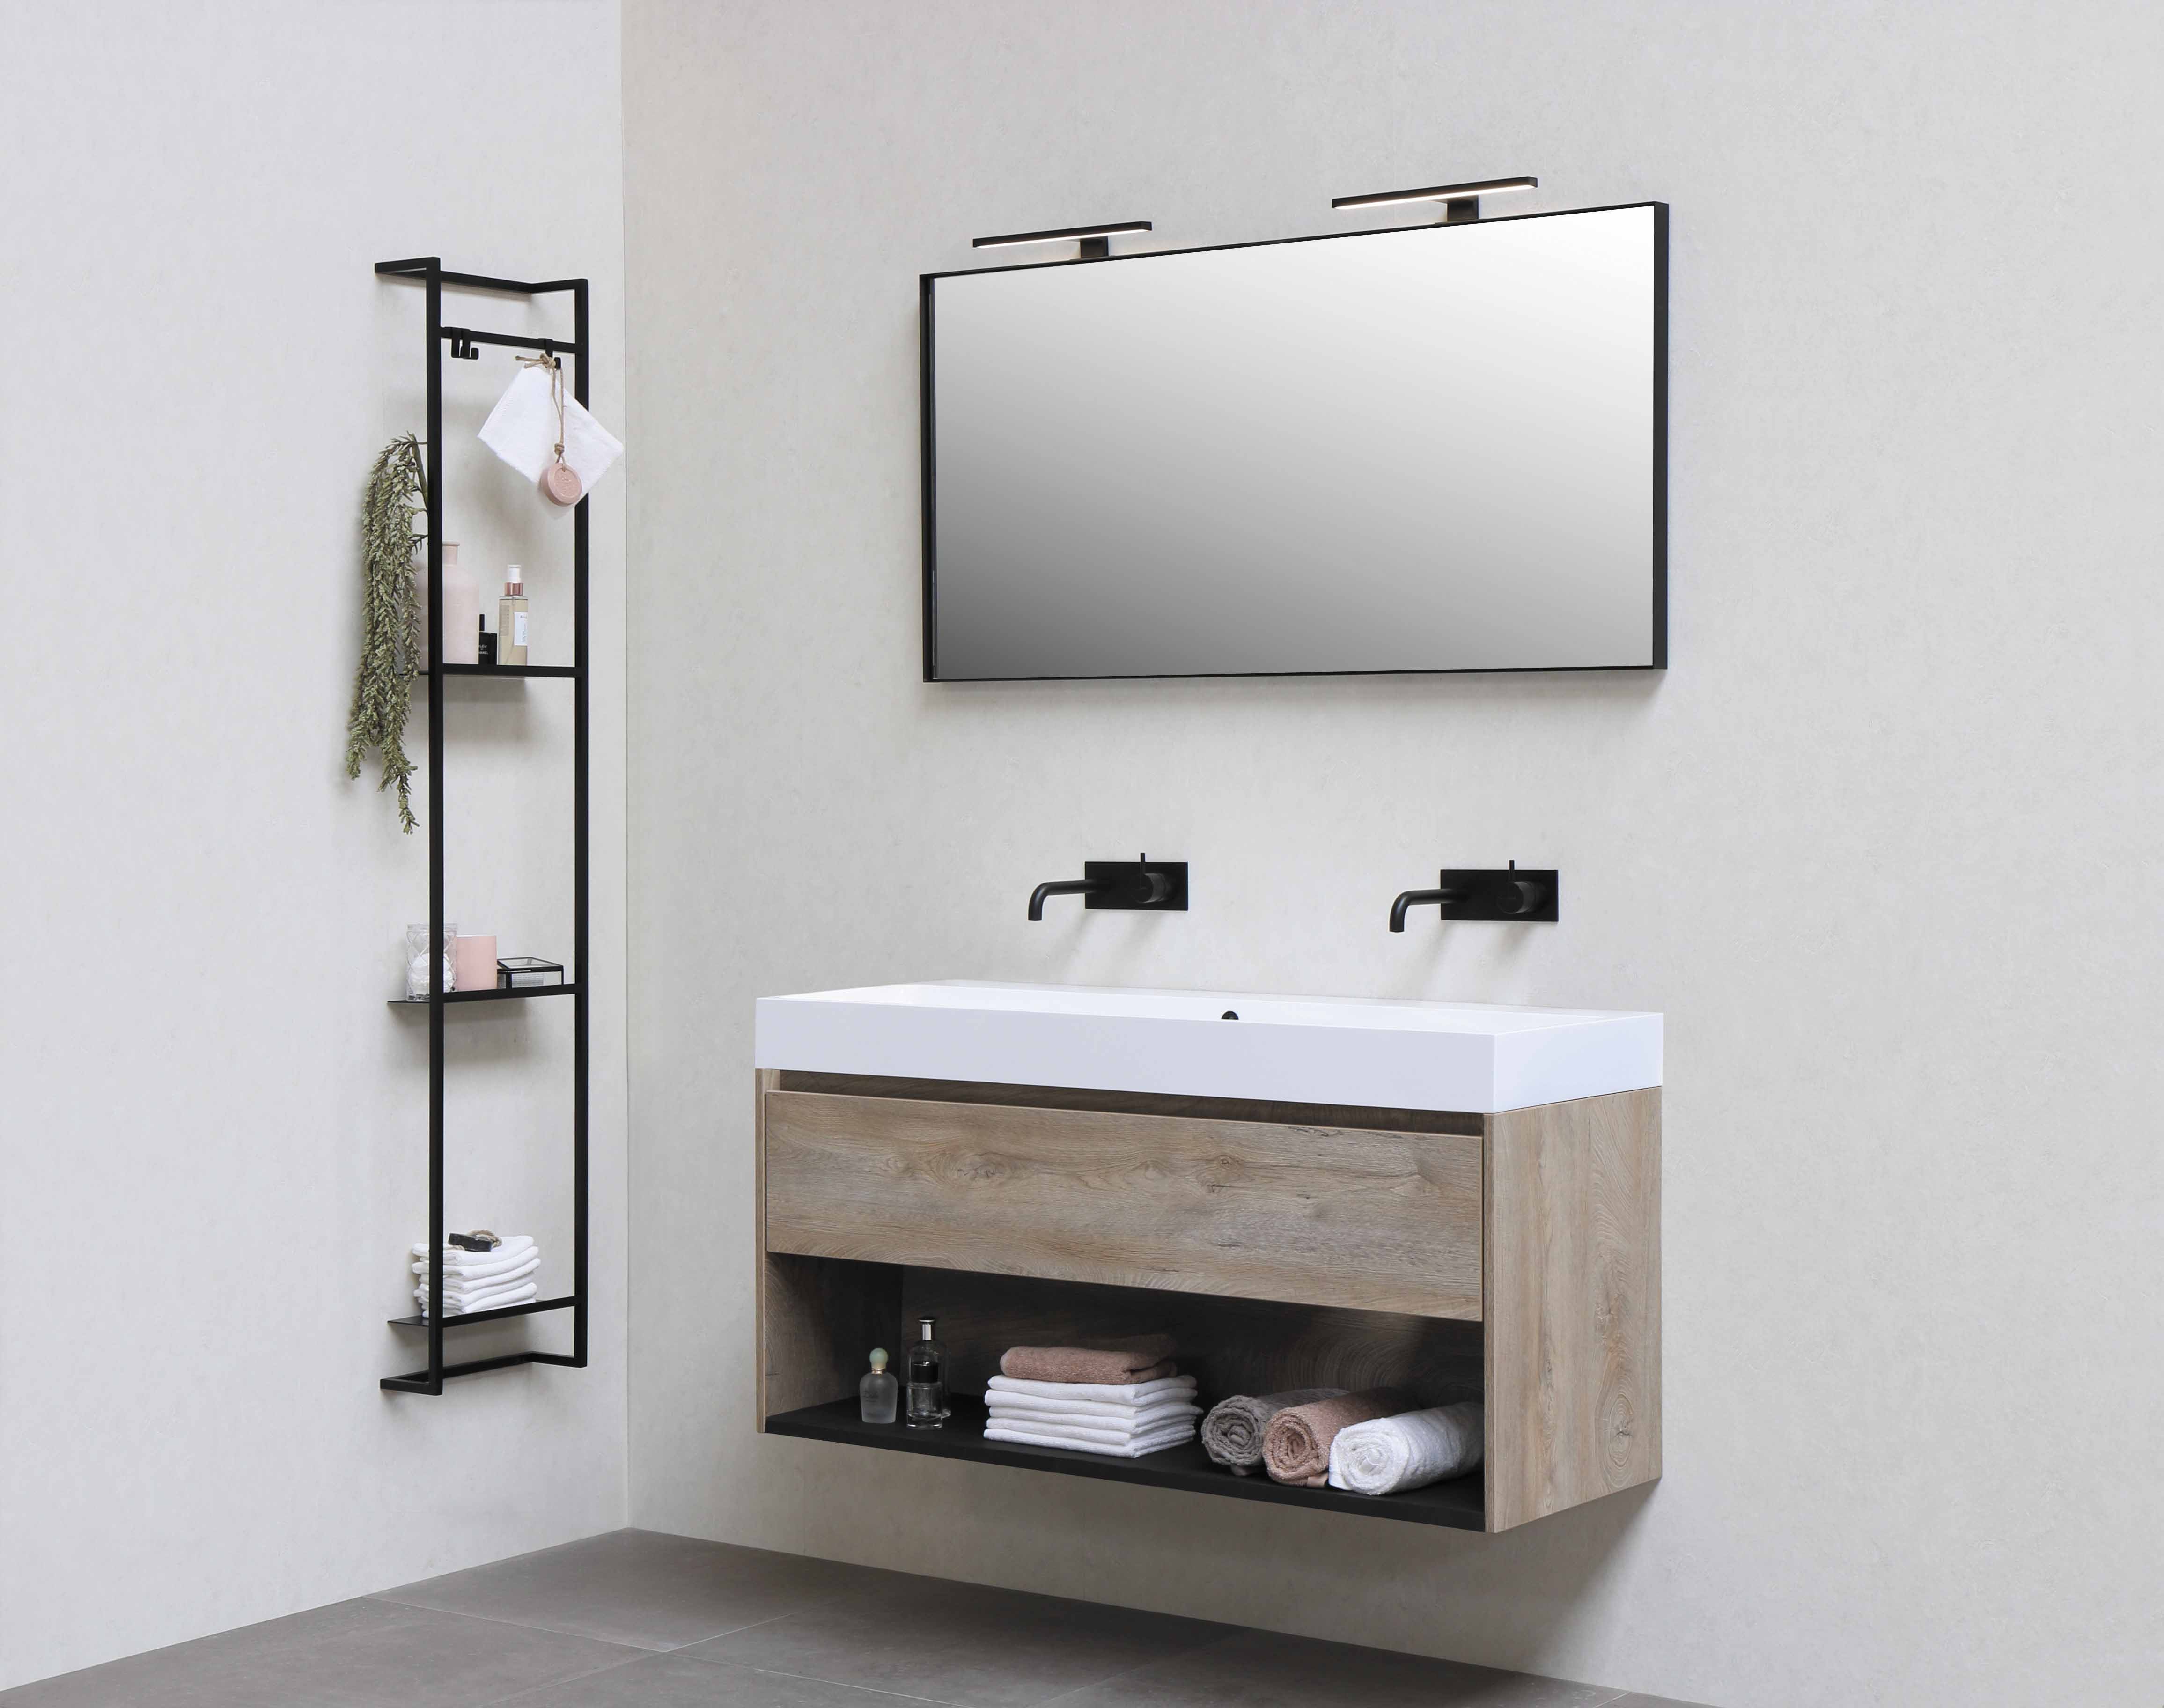 modern bathroom designs include spacious spaces with light airy colors and natural hues